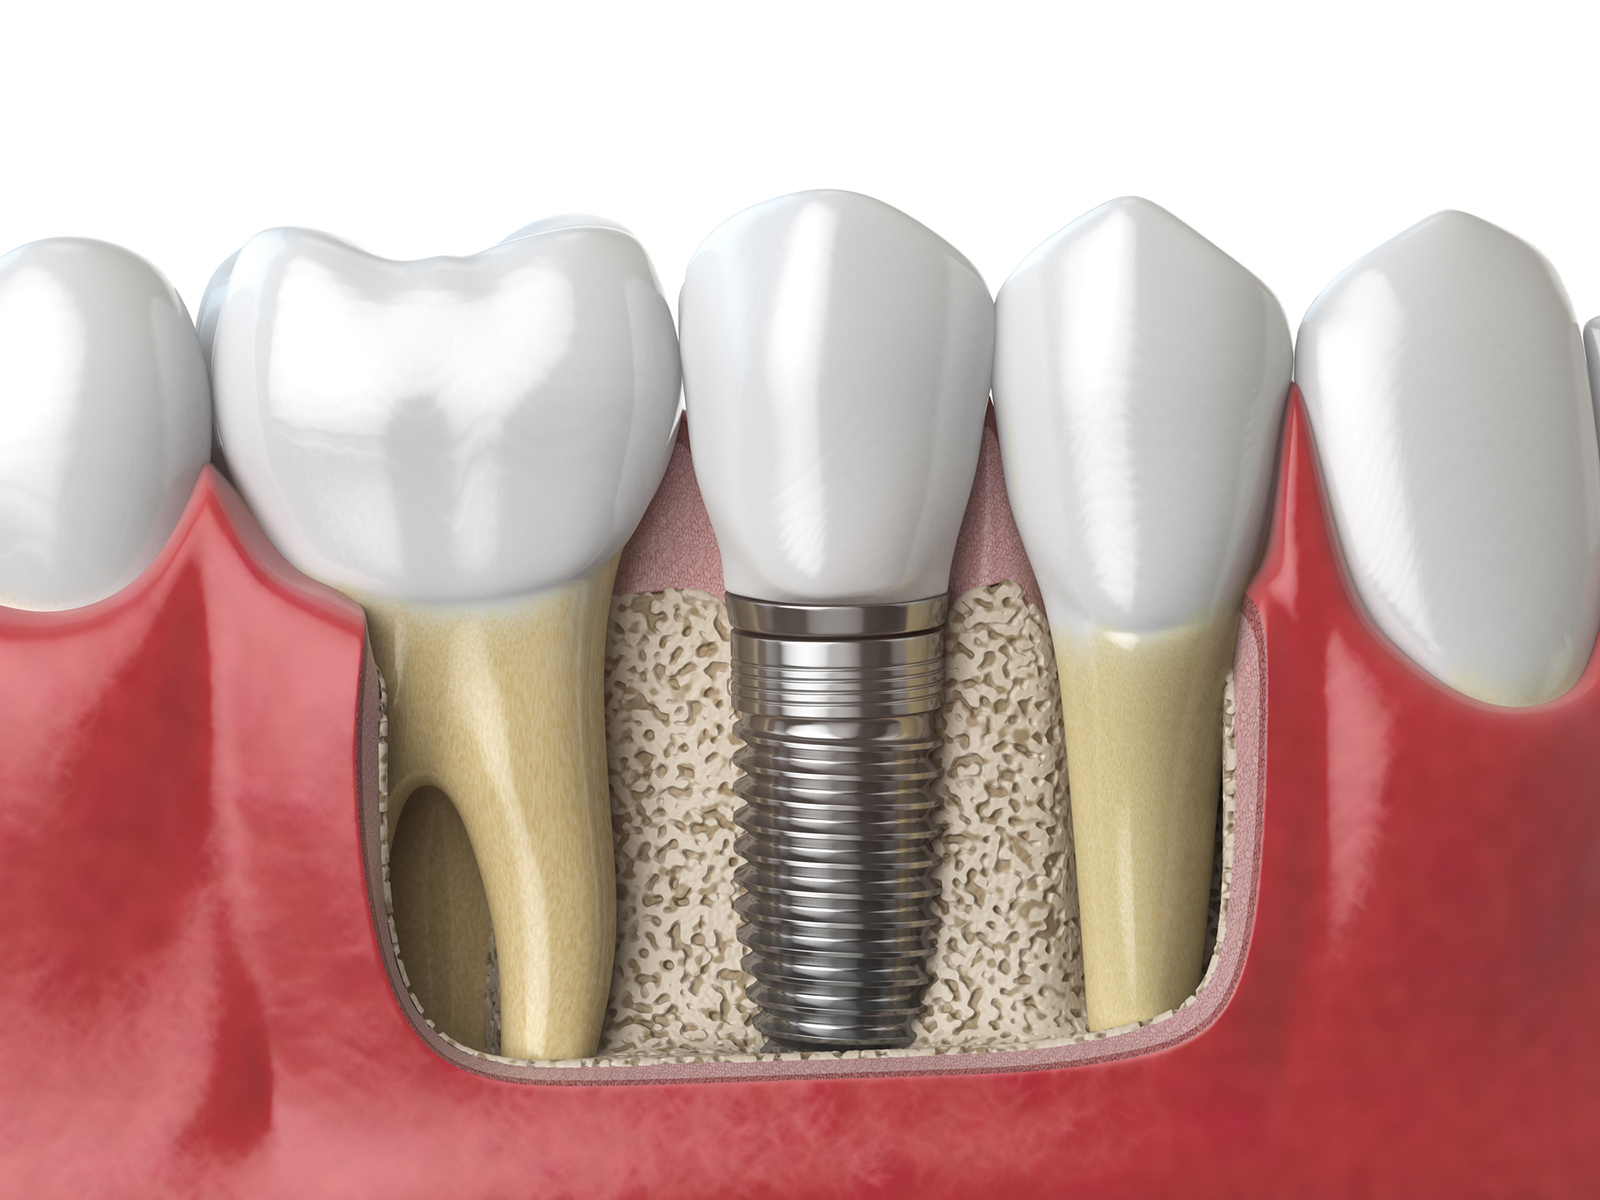 What Is The Age Limit For Dental Implants?